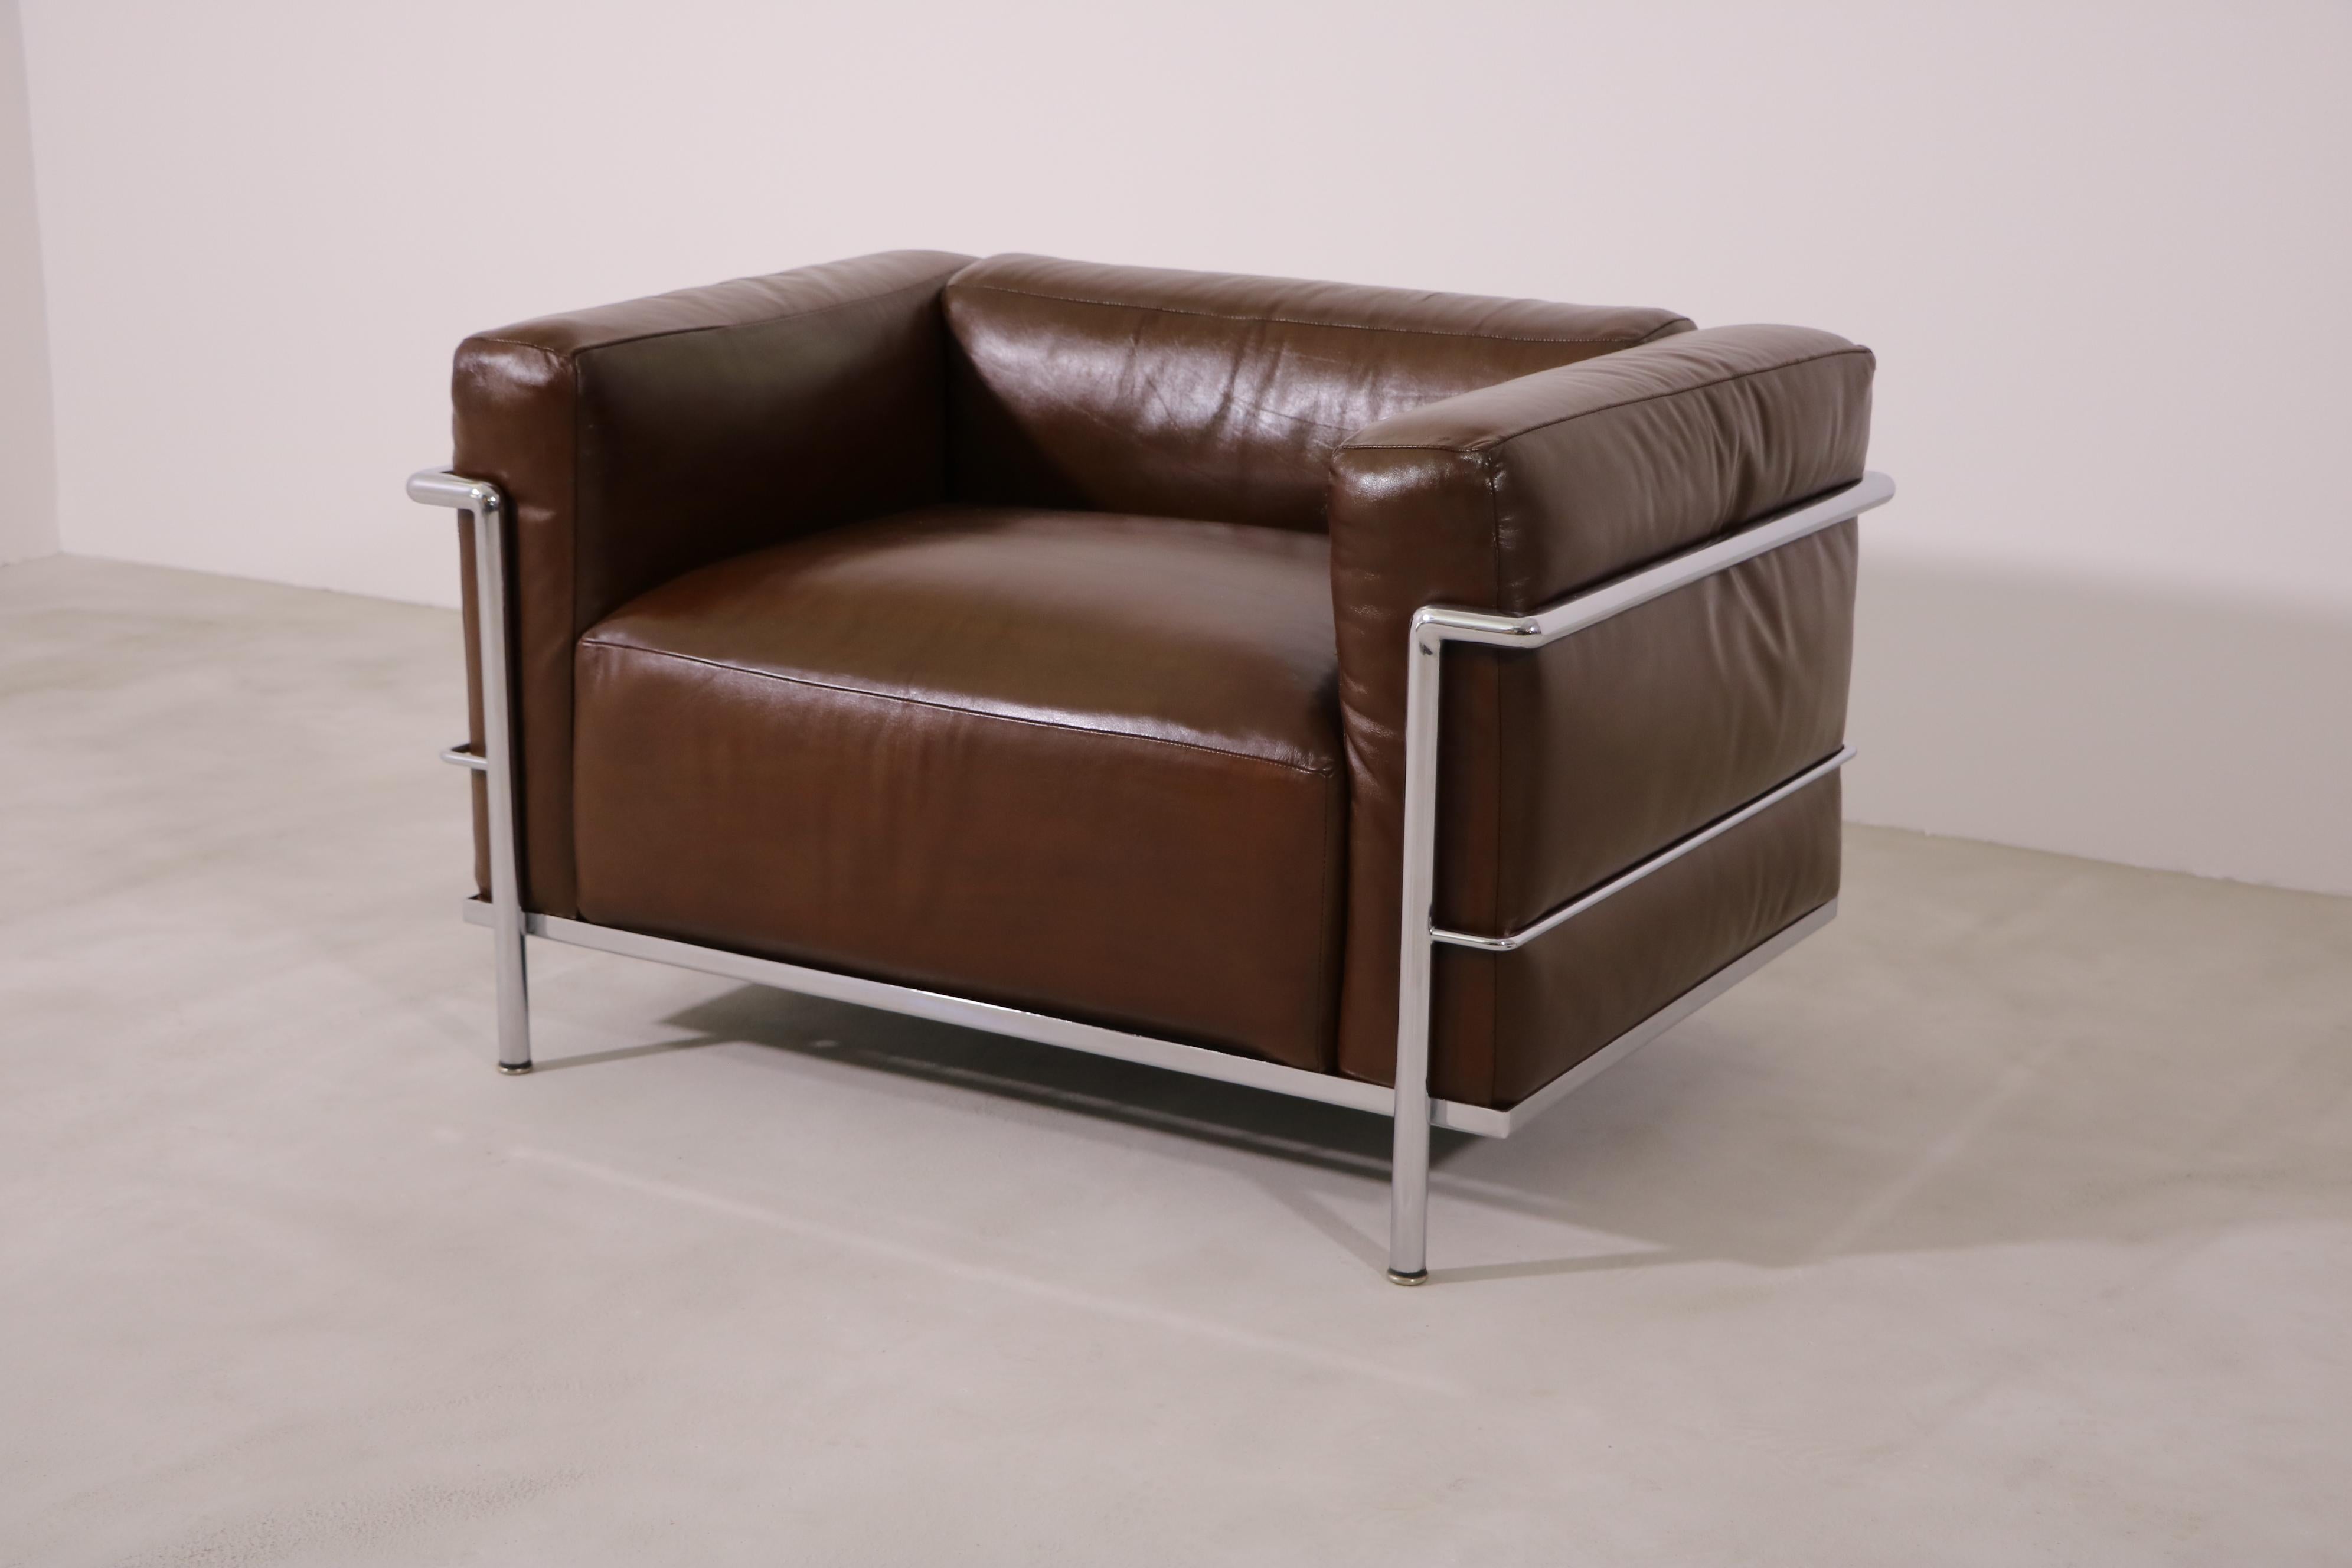 The armchair is an early production from 1970 in a brown leather with a great patina. 
Small serial number-1068, rubber straps and the old Cassina logo.
The price is per chair.